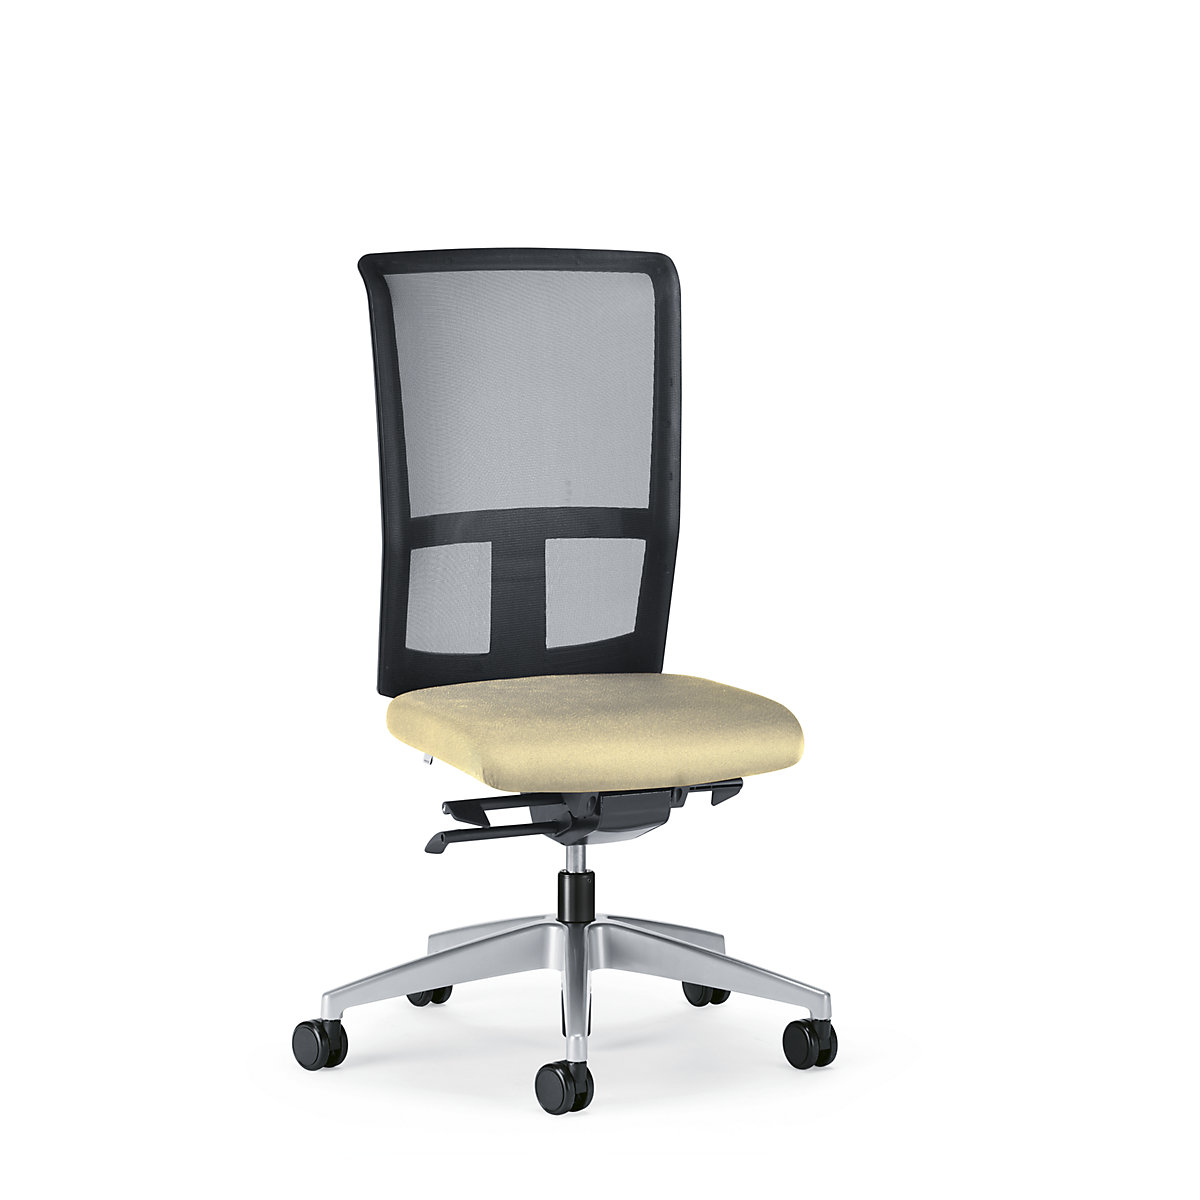 GOAL AIR office swivel chair, back rest height 545 mm – interstuhl, brilliant silver frame, with soft castors, beige, seat depth 410 mm-6